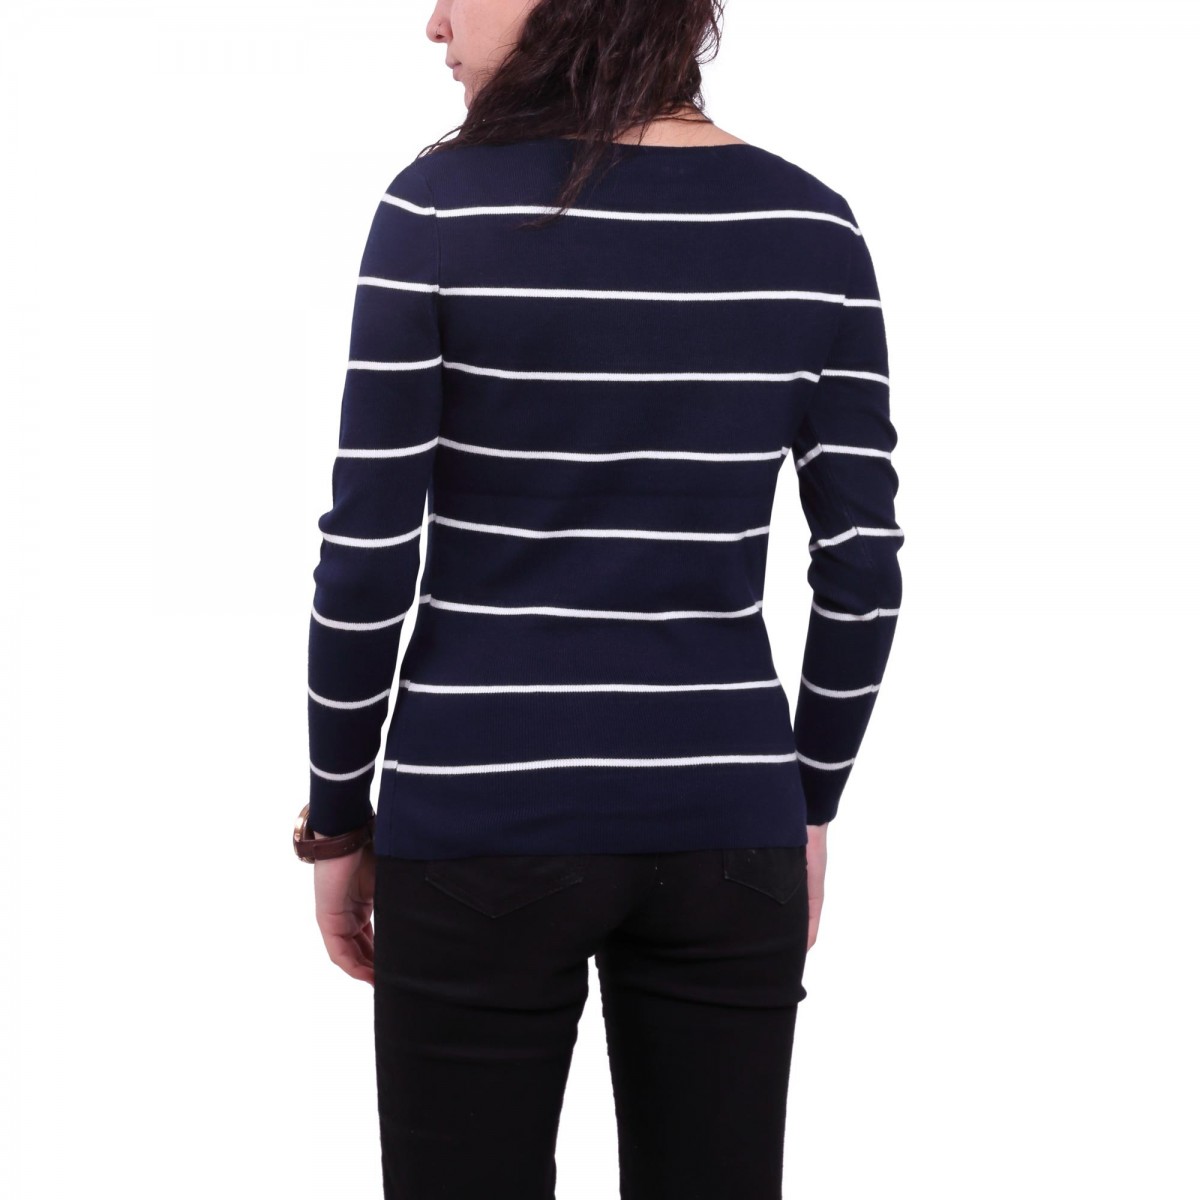 MEREDITH 7/8 PULLOVER KNT